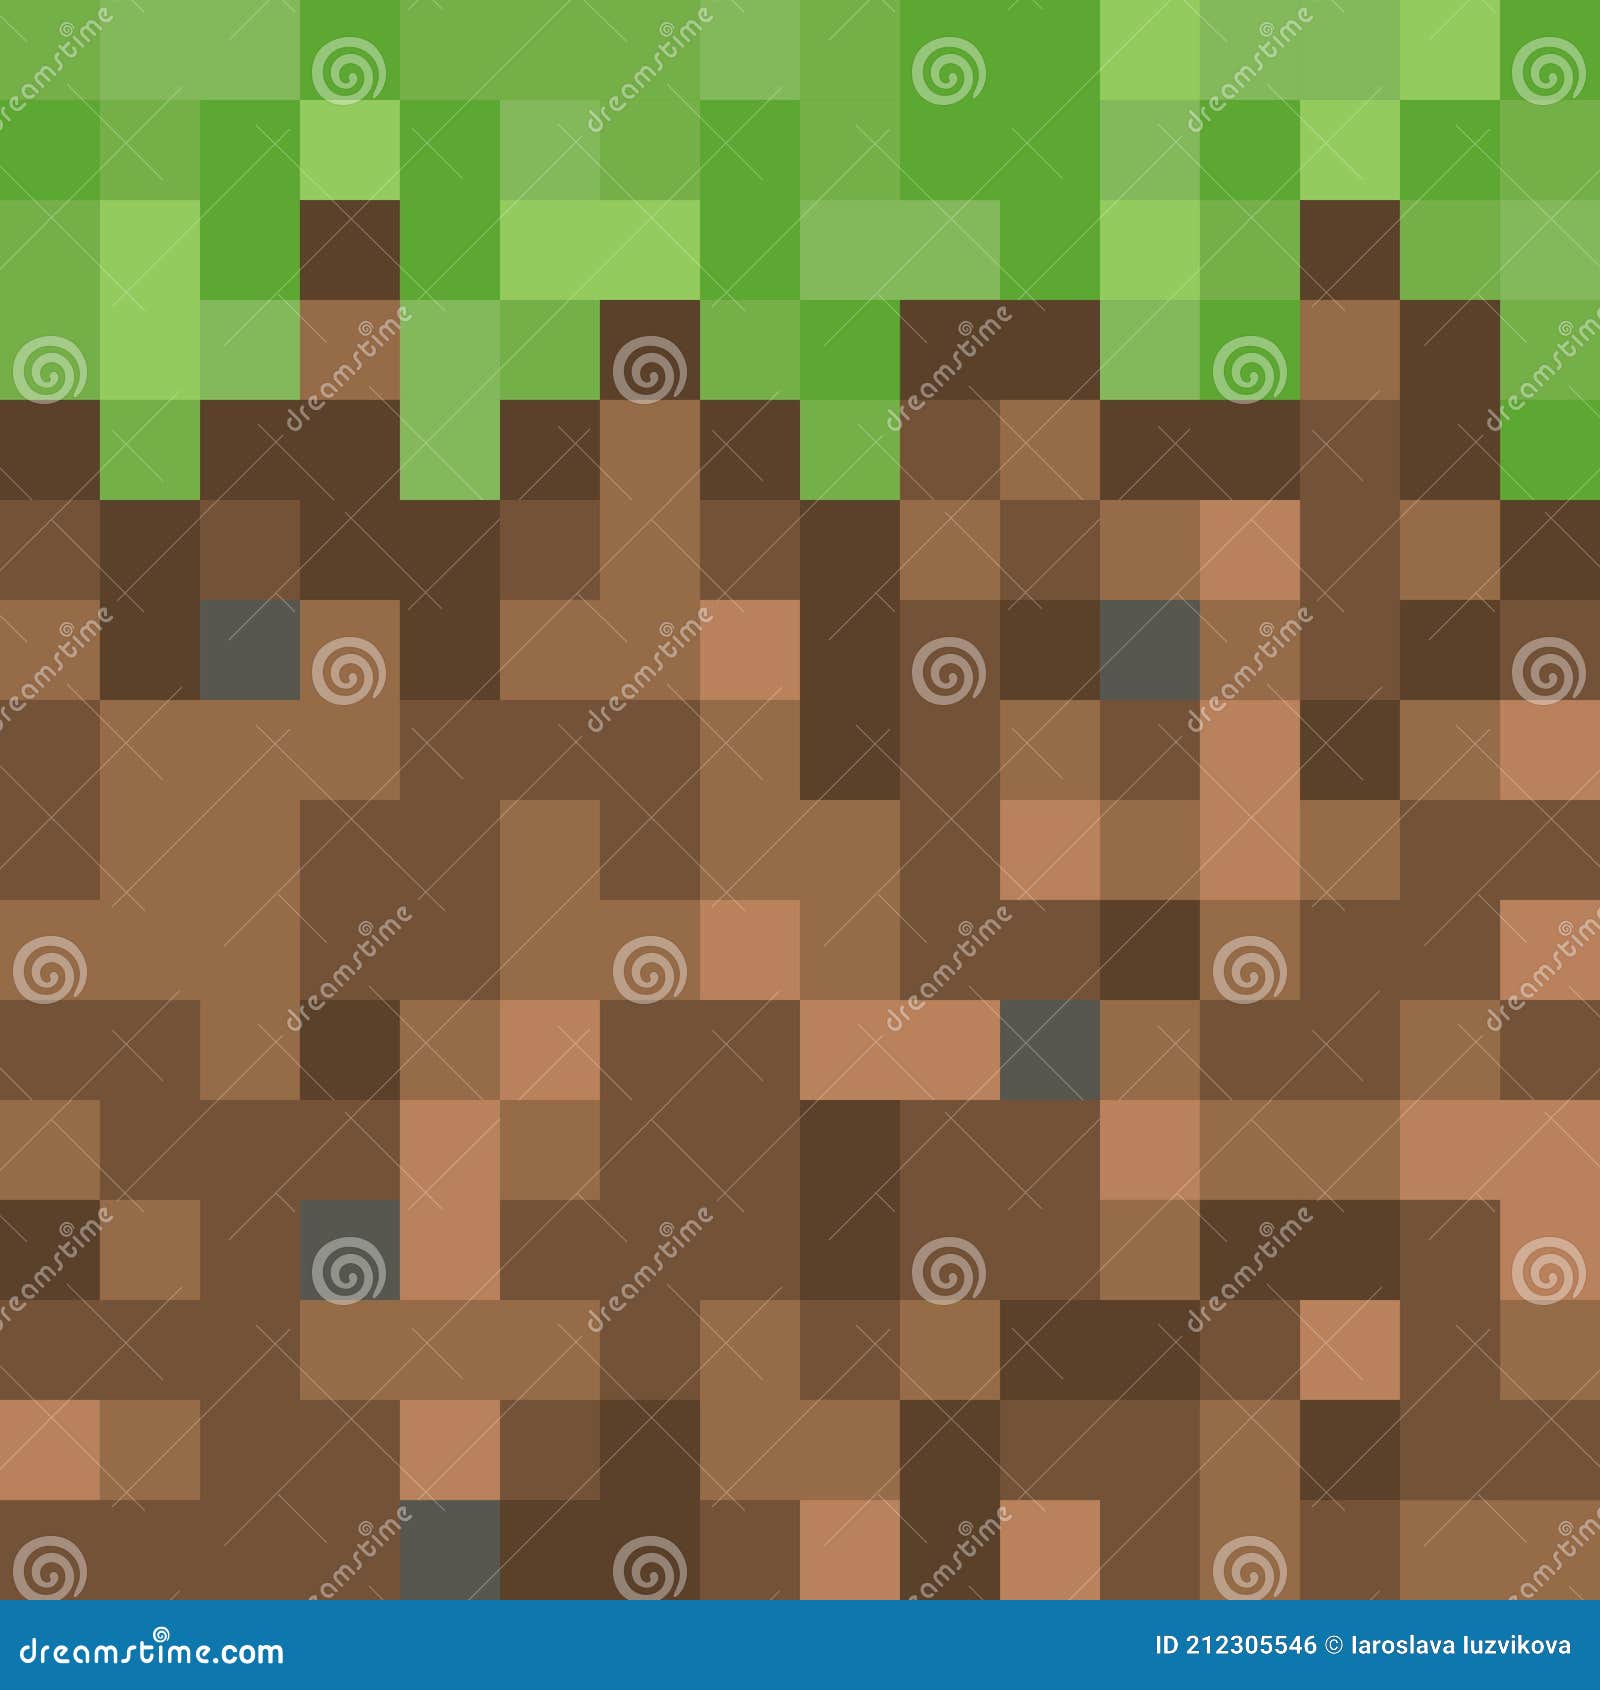 pixel minecraft style land block background. concept of game ground pixelated horizontal seamless background